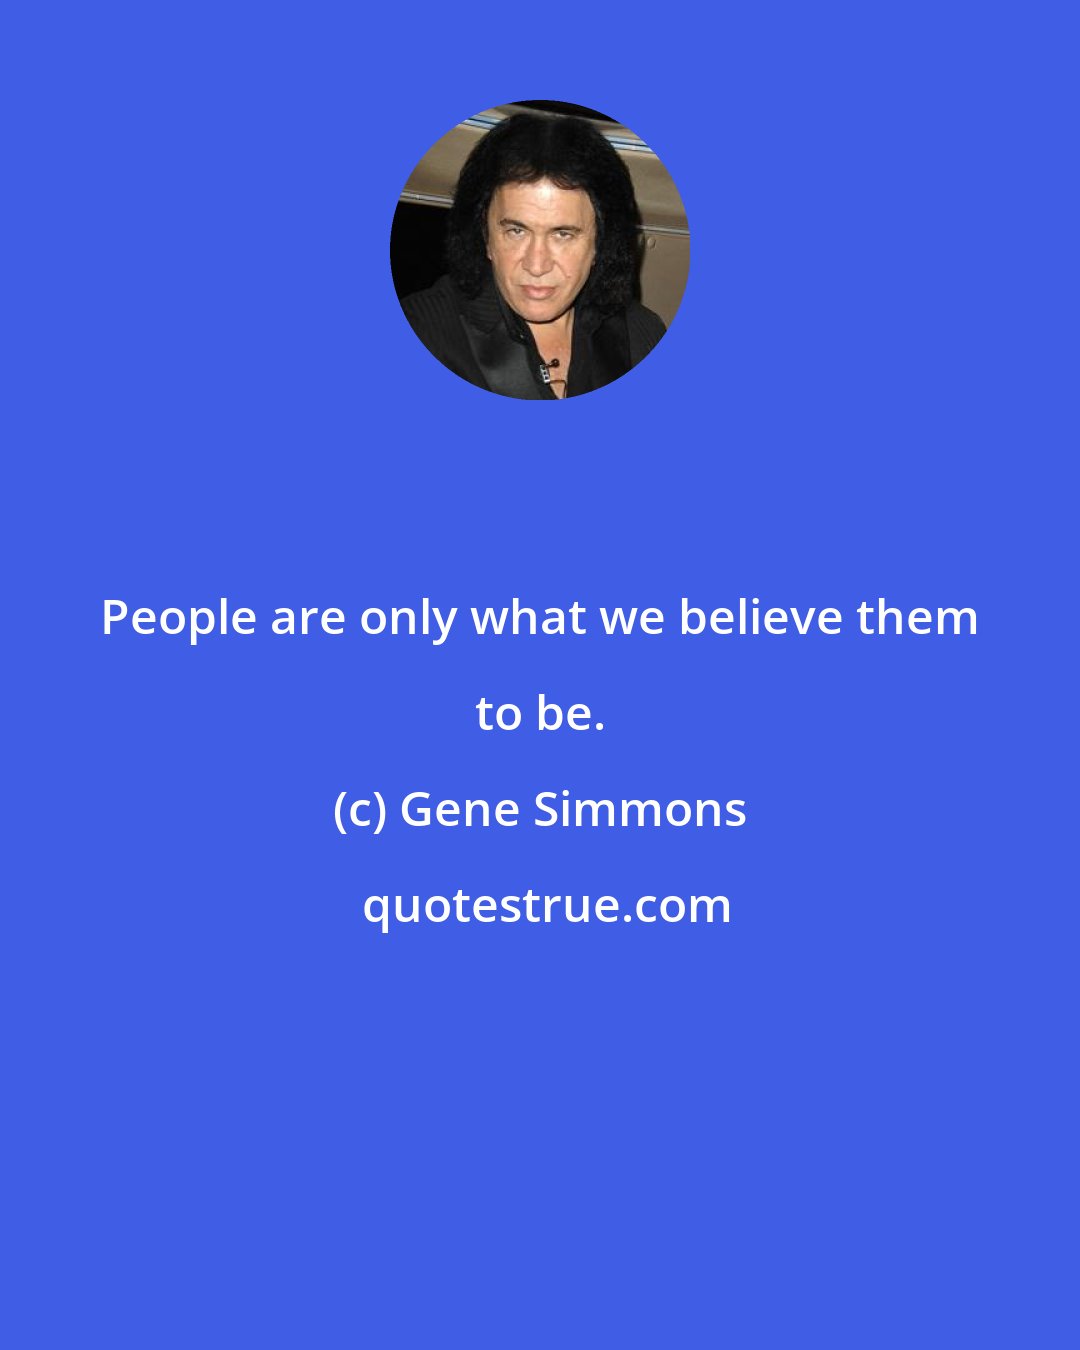 Gene Simmons: People are only what we believe them to be.